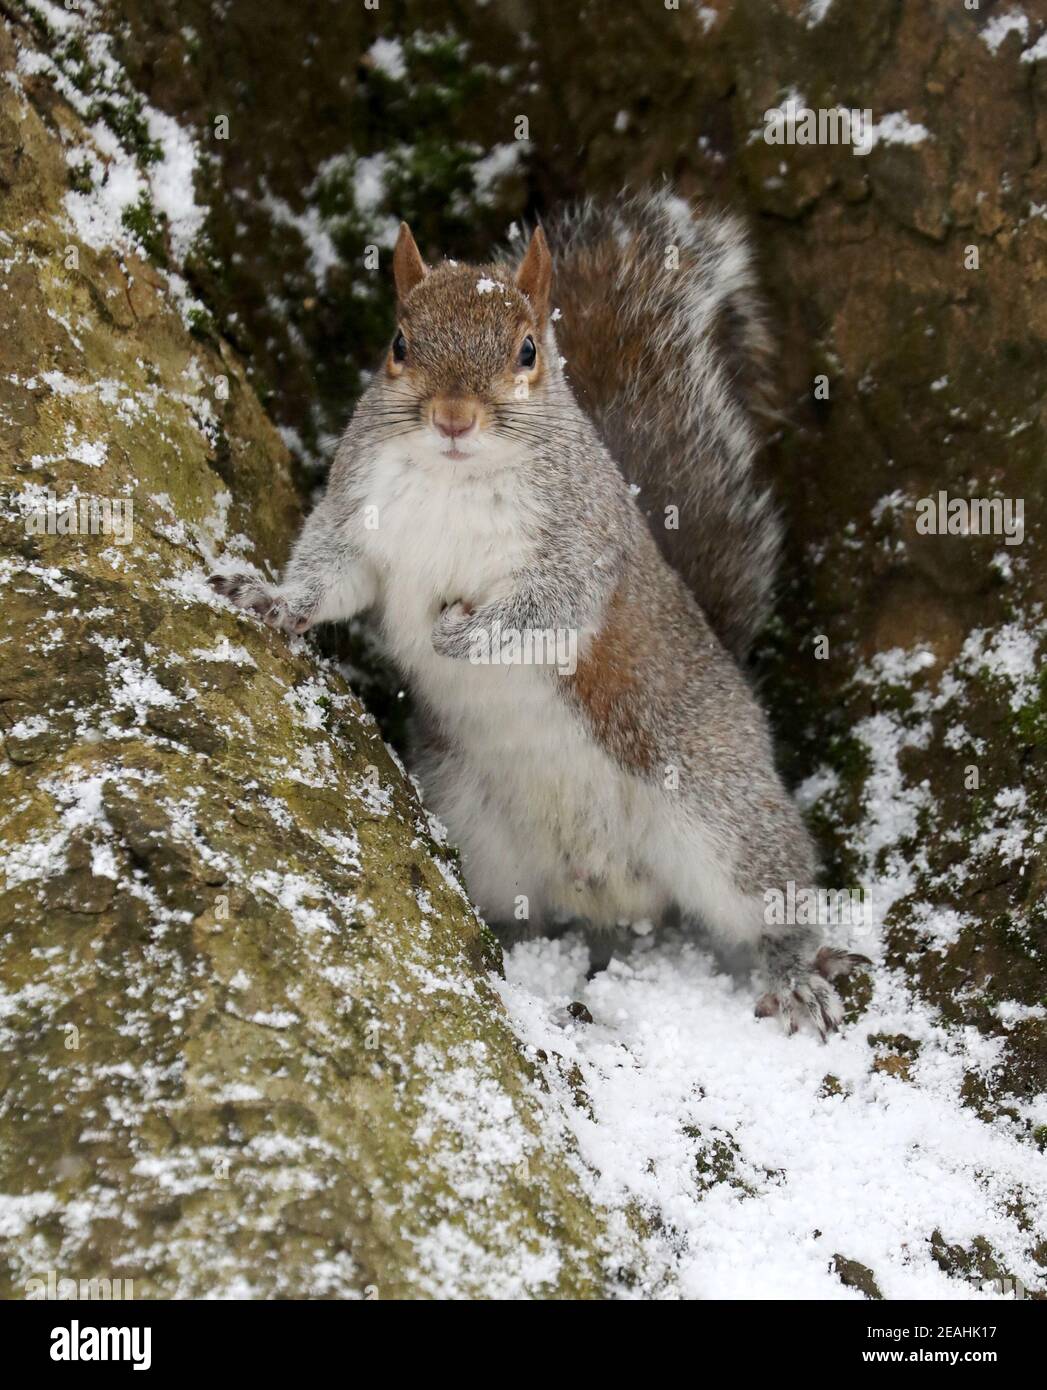 London, UK. 09th Feb, 2021. A squirrel seen at St James' Park during a snowfall.London has been experiencing snow as the Storm Darcy hits the city. Credit: SOPA Images Limited/Alamy Live News Stock Photo